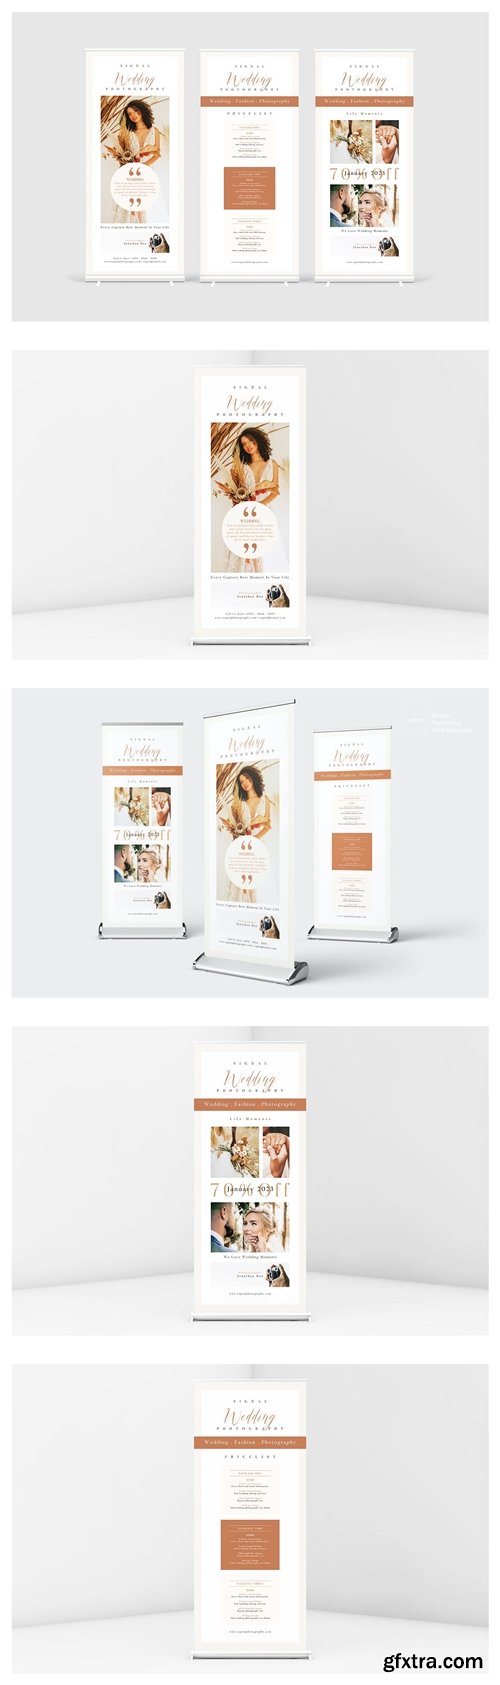 Wedding Photography Rollup Banner